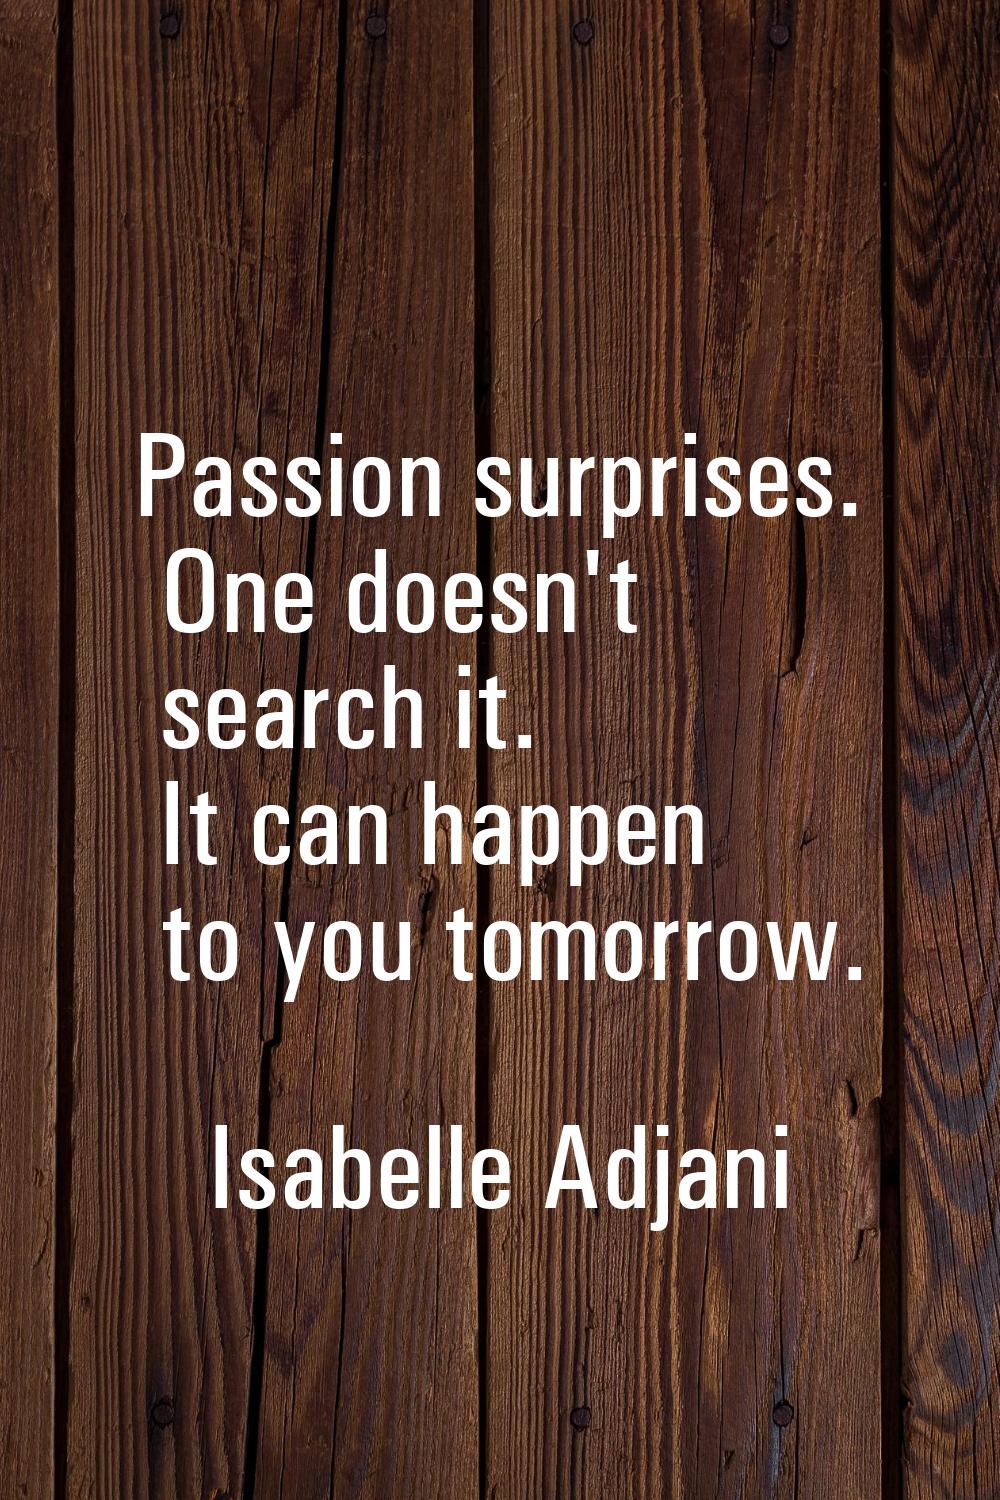 Passion surprises. One doesn't search it. It can happen to you tomorrow.